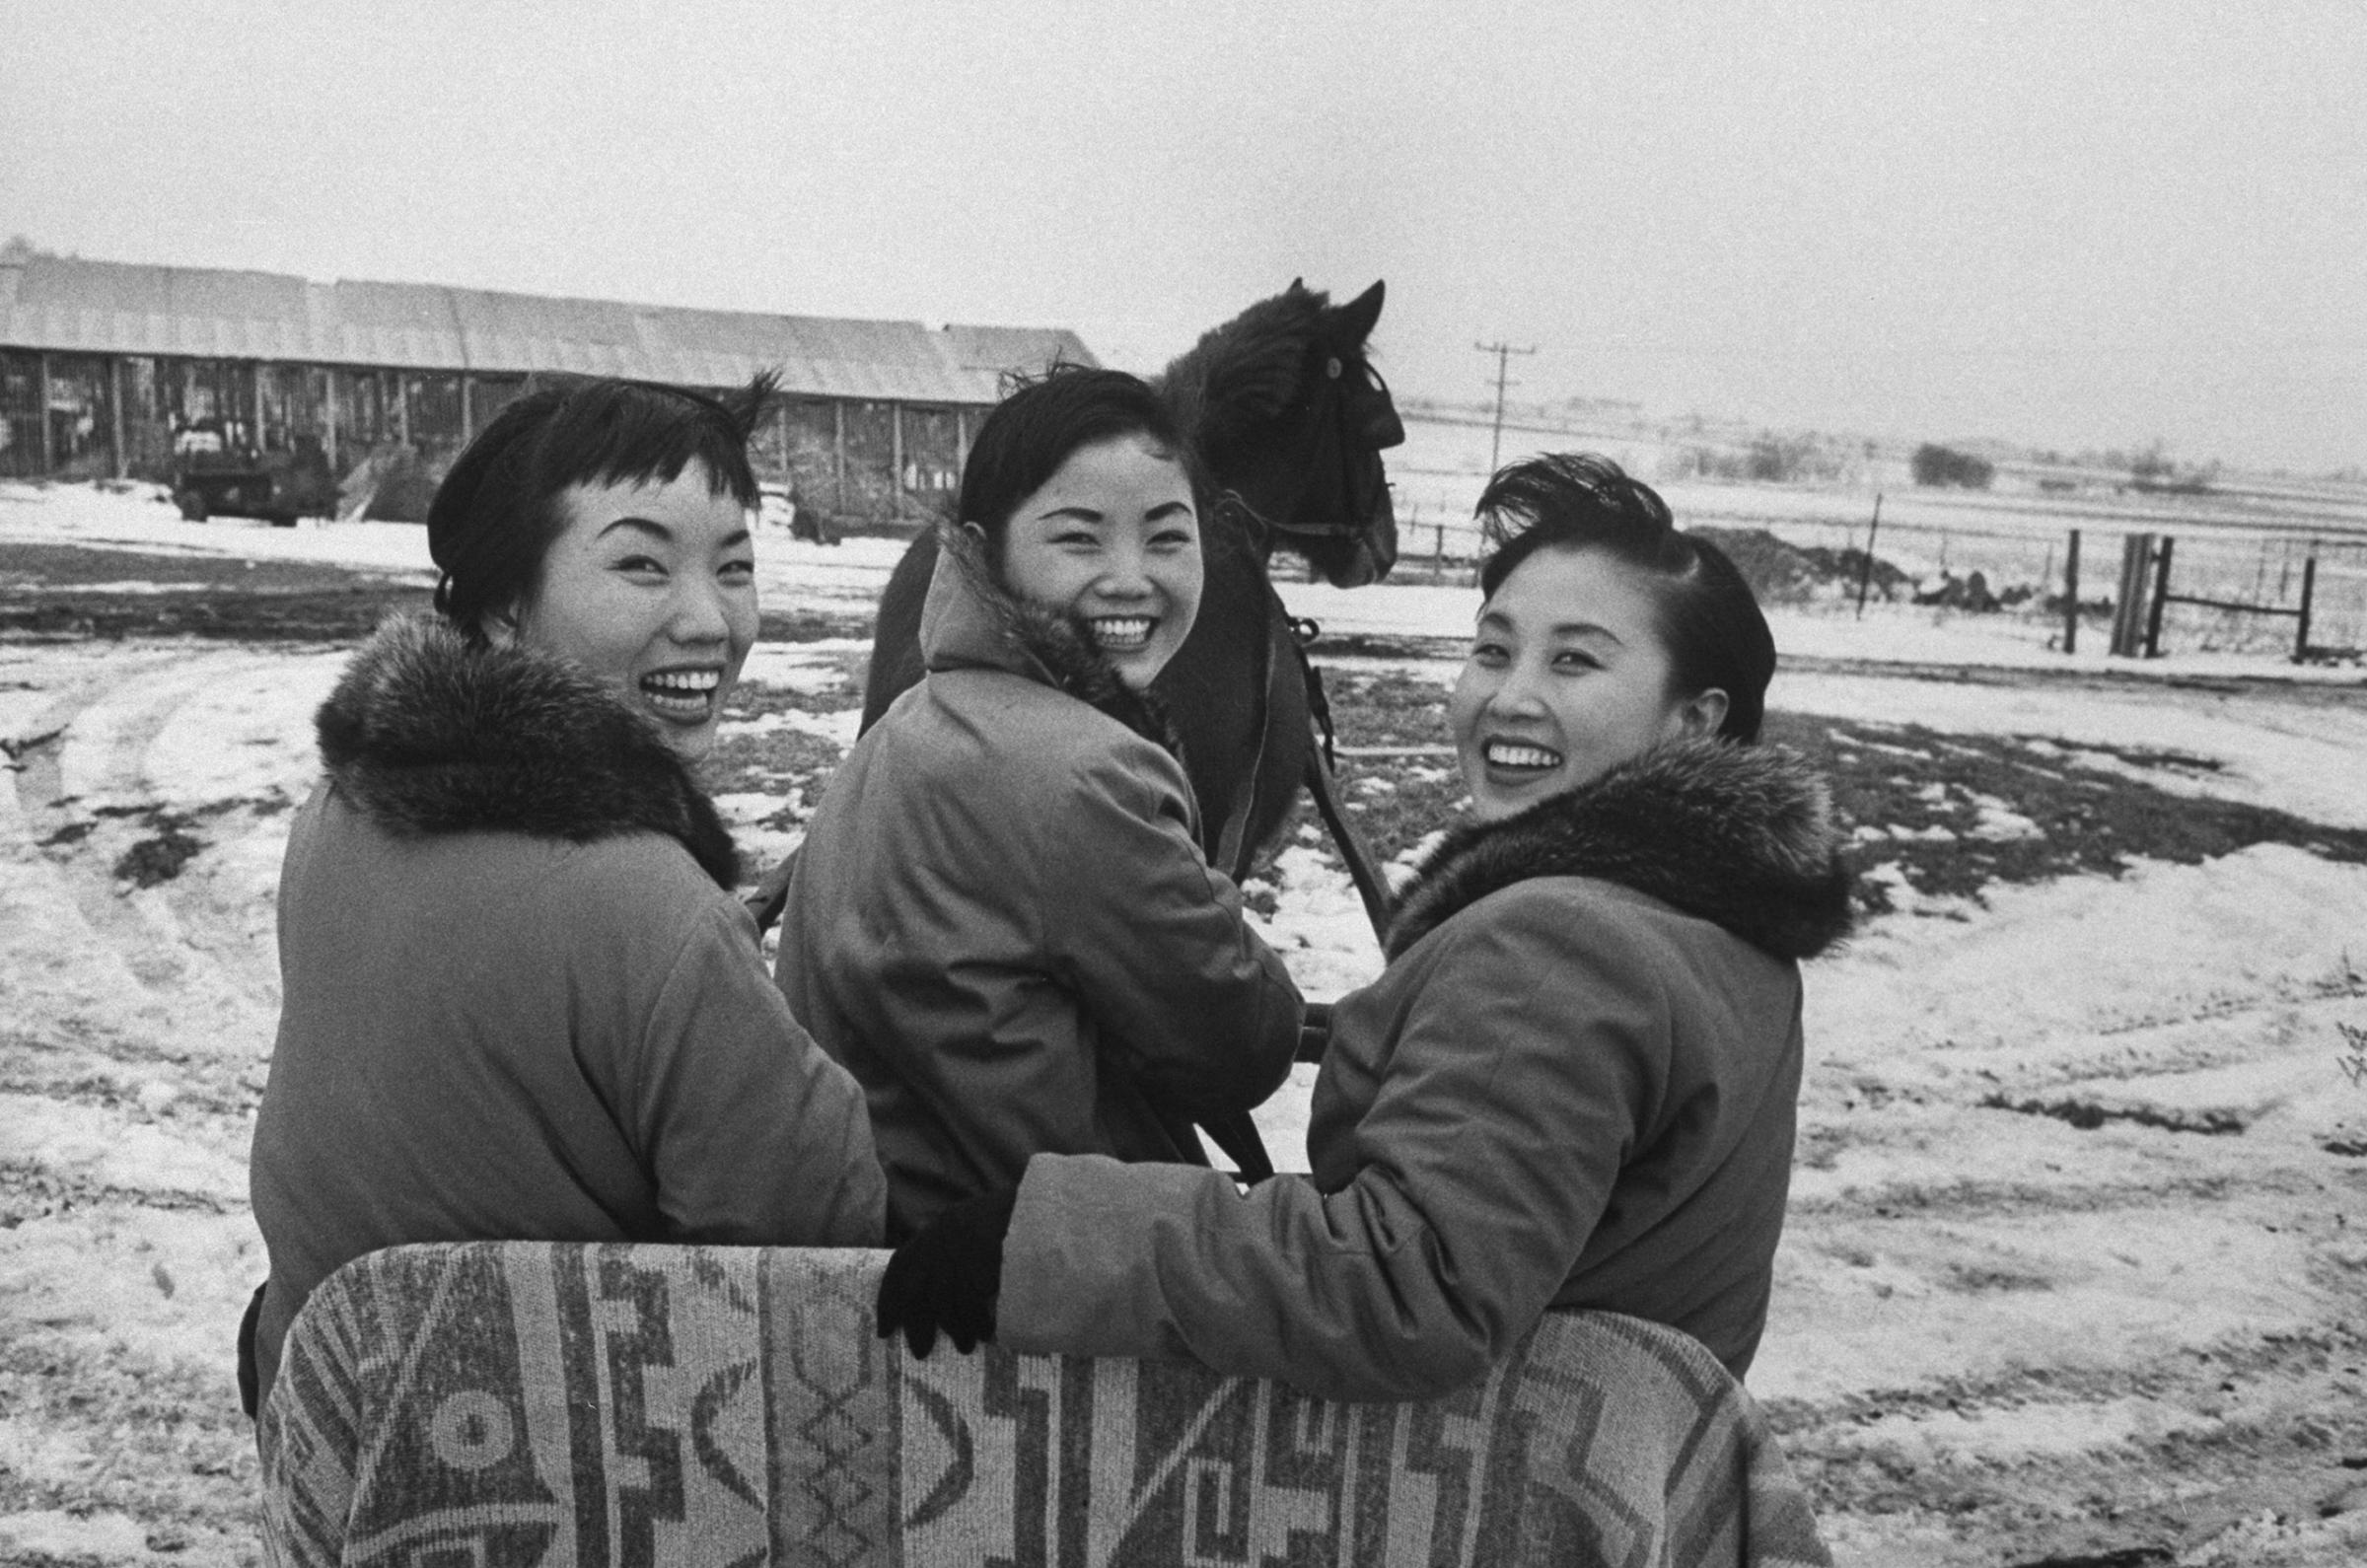 "On a sleigh, the three Kim sisters start off for a horse-drawn tour of [their manager's mother's] snow-covered Illinois farm. From the left are Sook Ja, Ai Ja, and Min Ja."